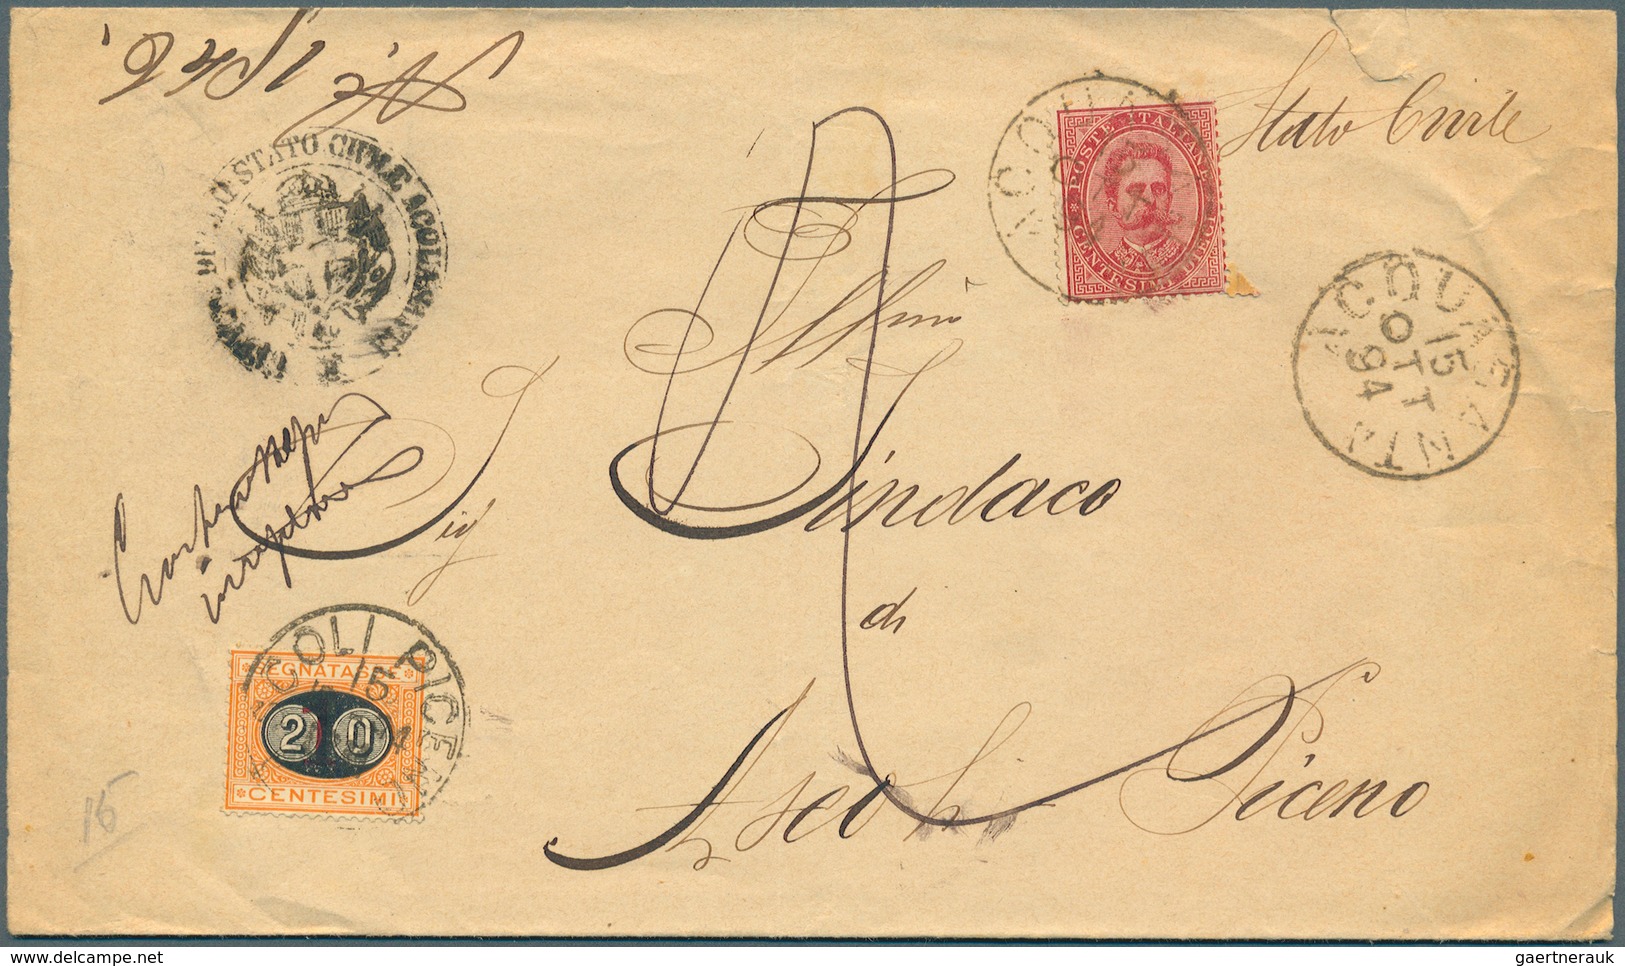 27026 Italien - Portomarken: 1883/1970 (ca) 80+ covers with porto stamps - a huge part of them "used as re